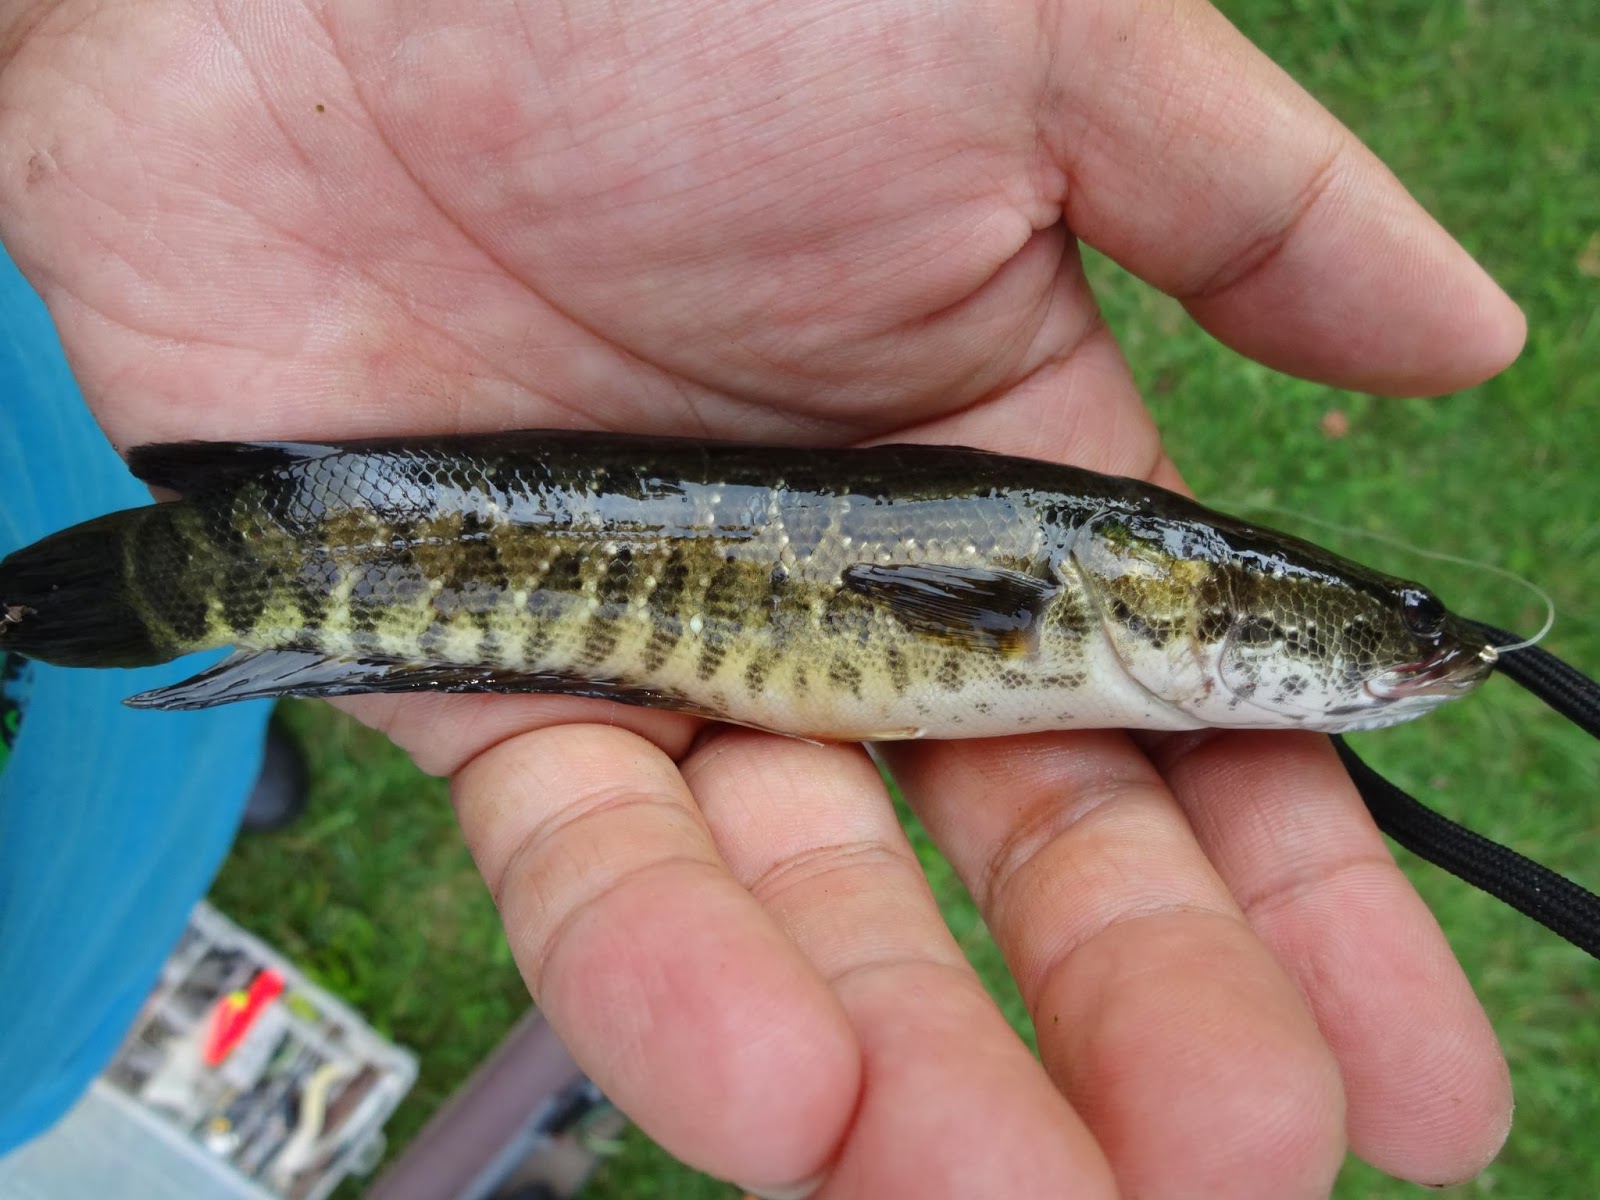 Extreme Philly Fishing: The Invasive Northern Snakeheads (Channa